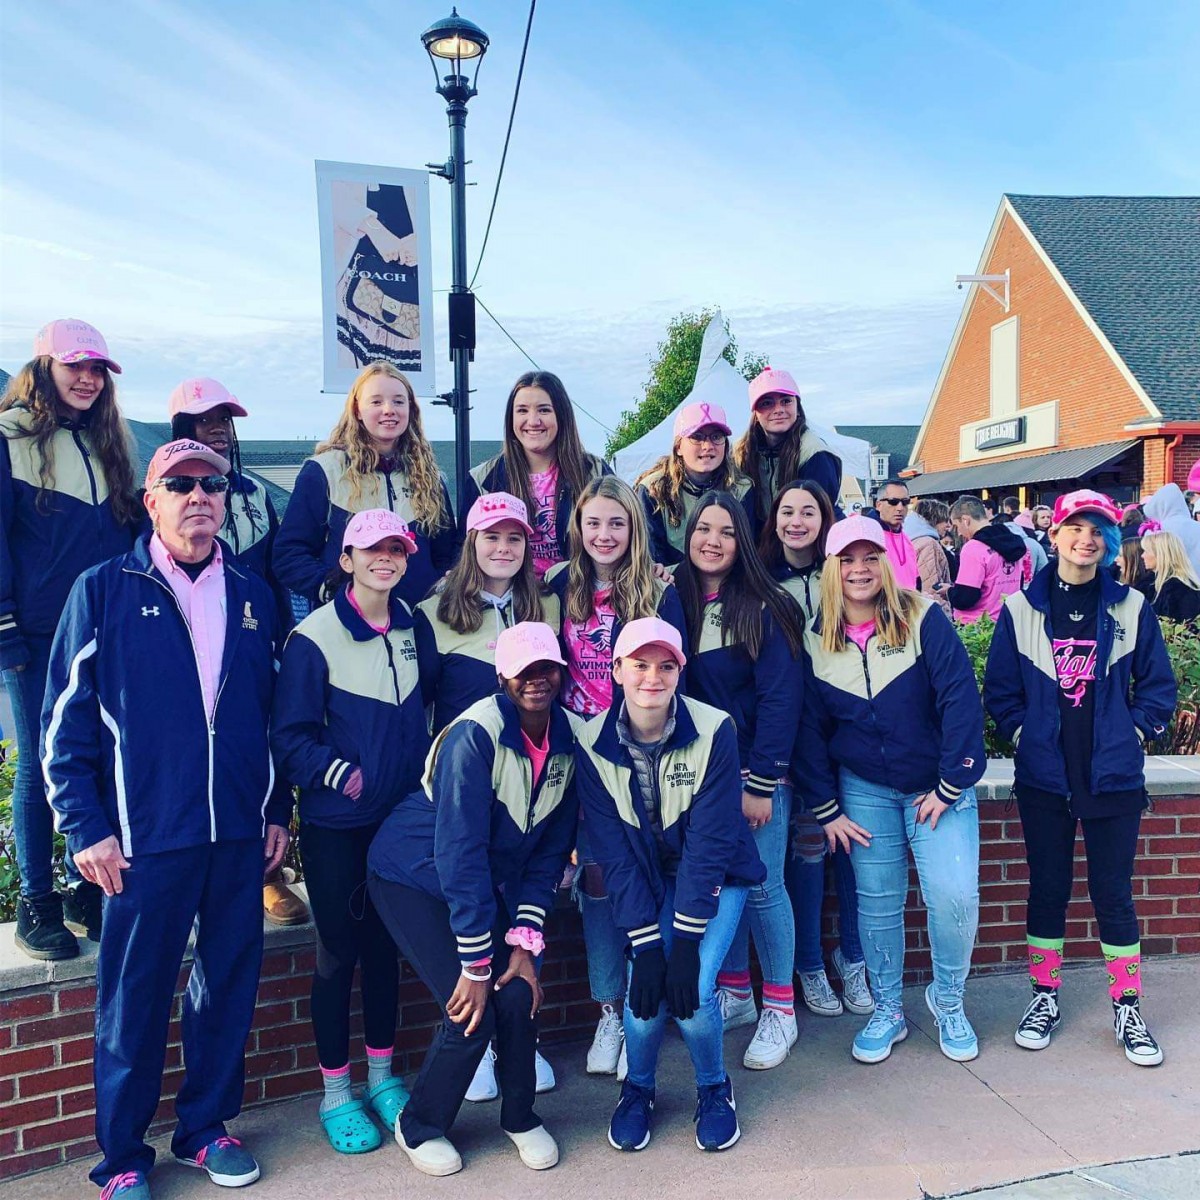 Team poses for a photo at annual Breast Cancer Walk.